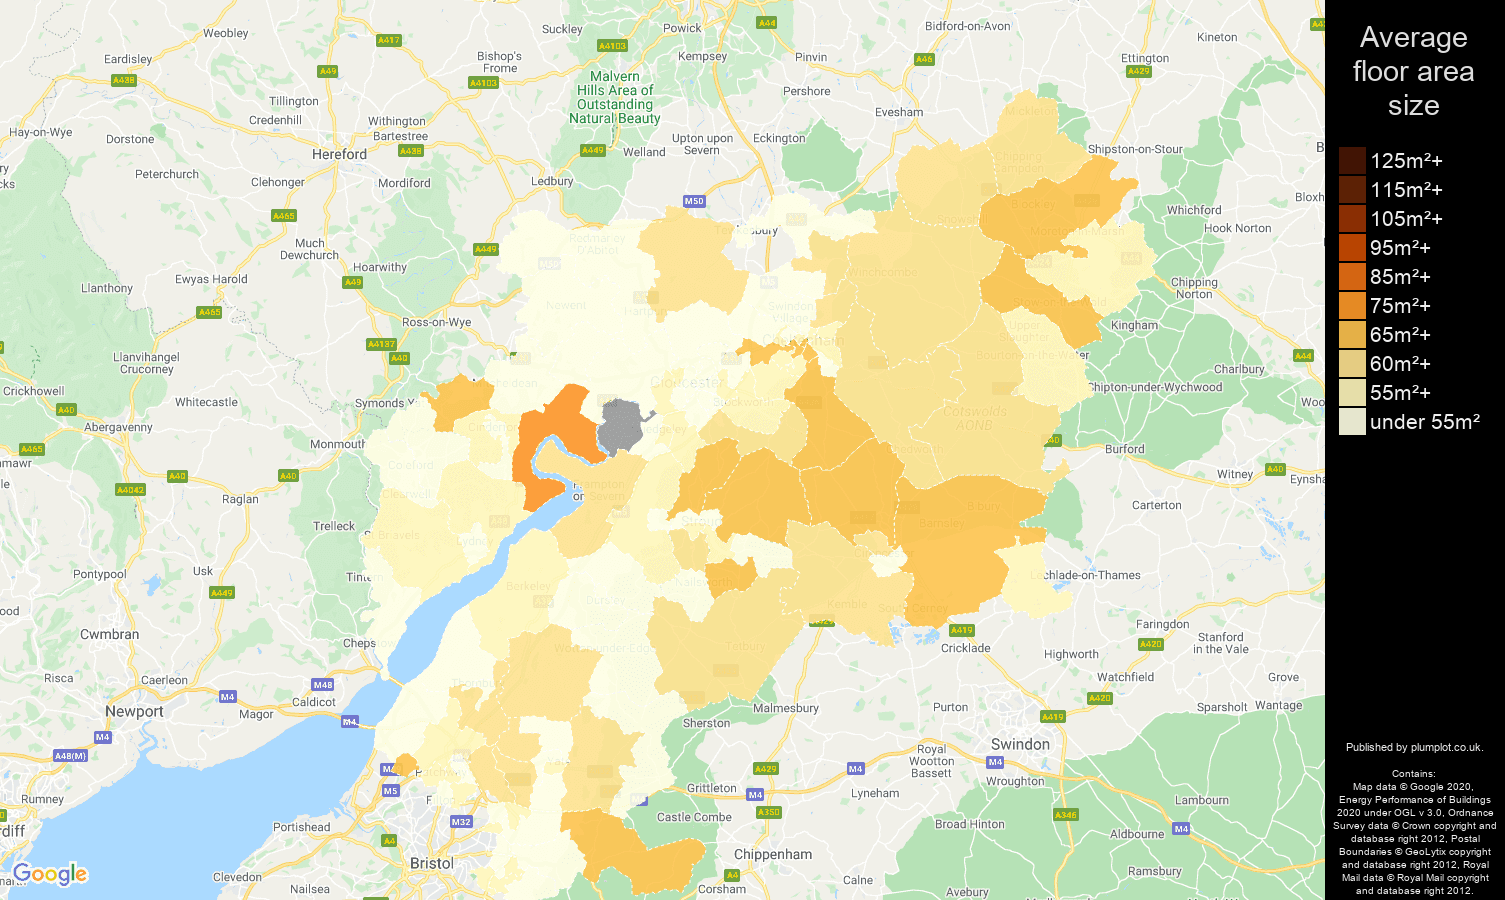 Gloucestershire map of average floor area size of flats